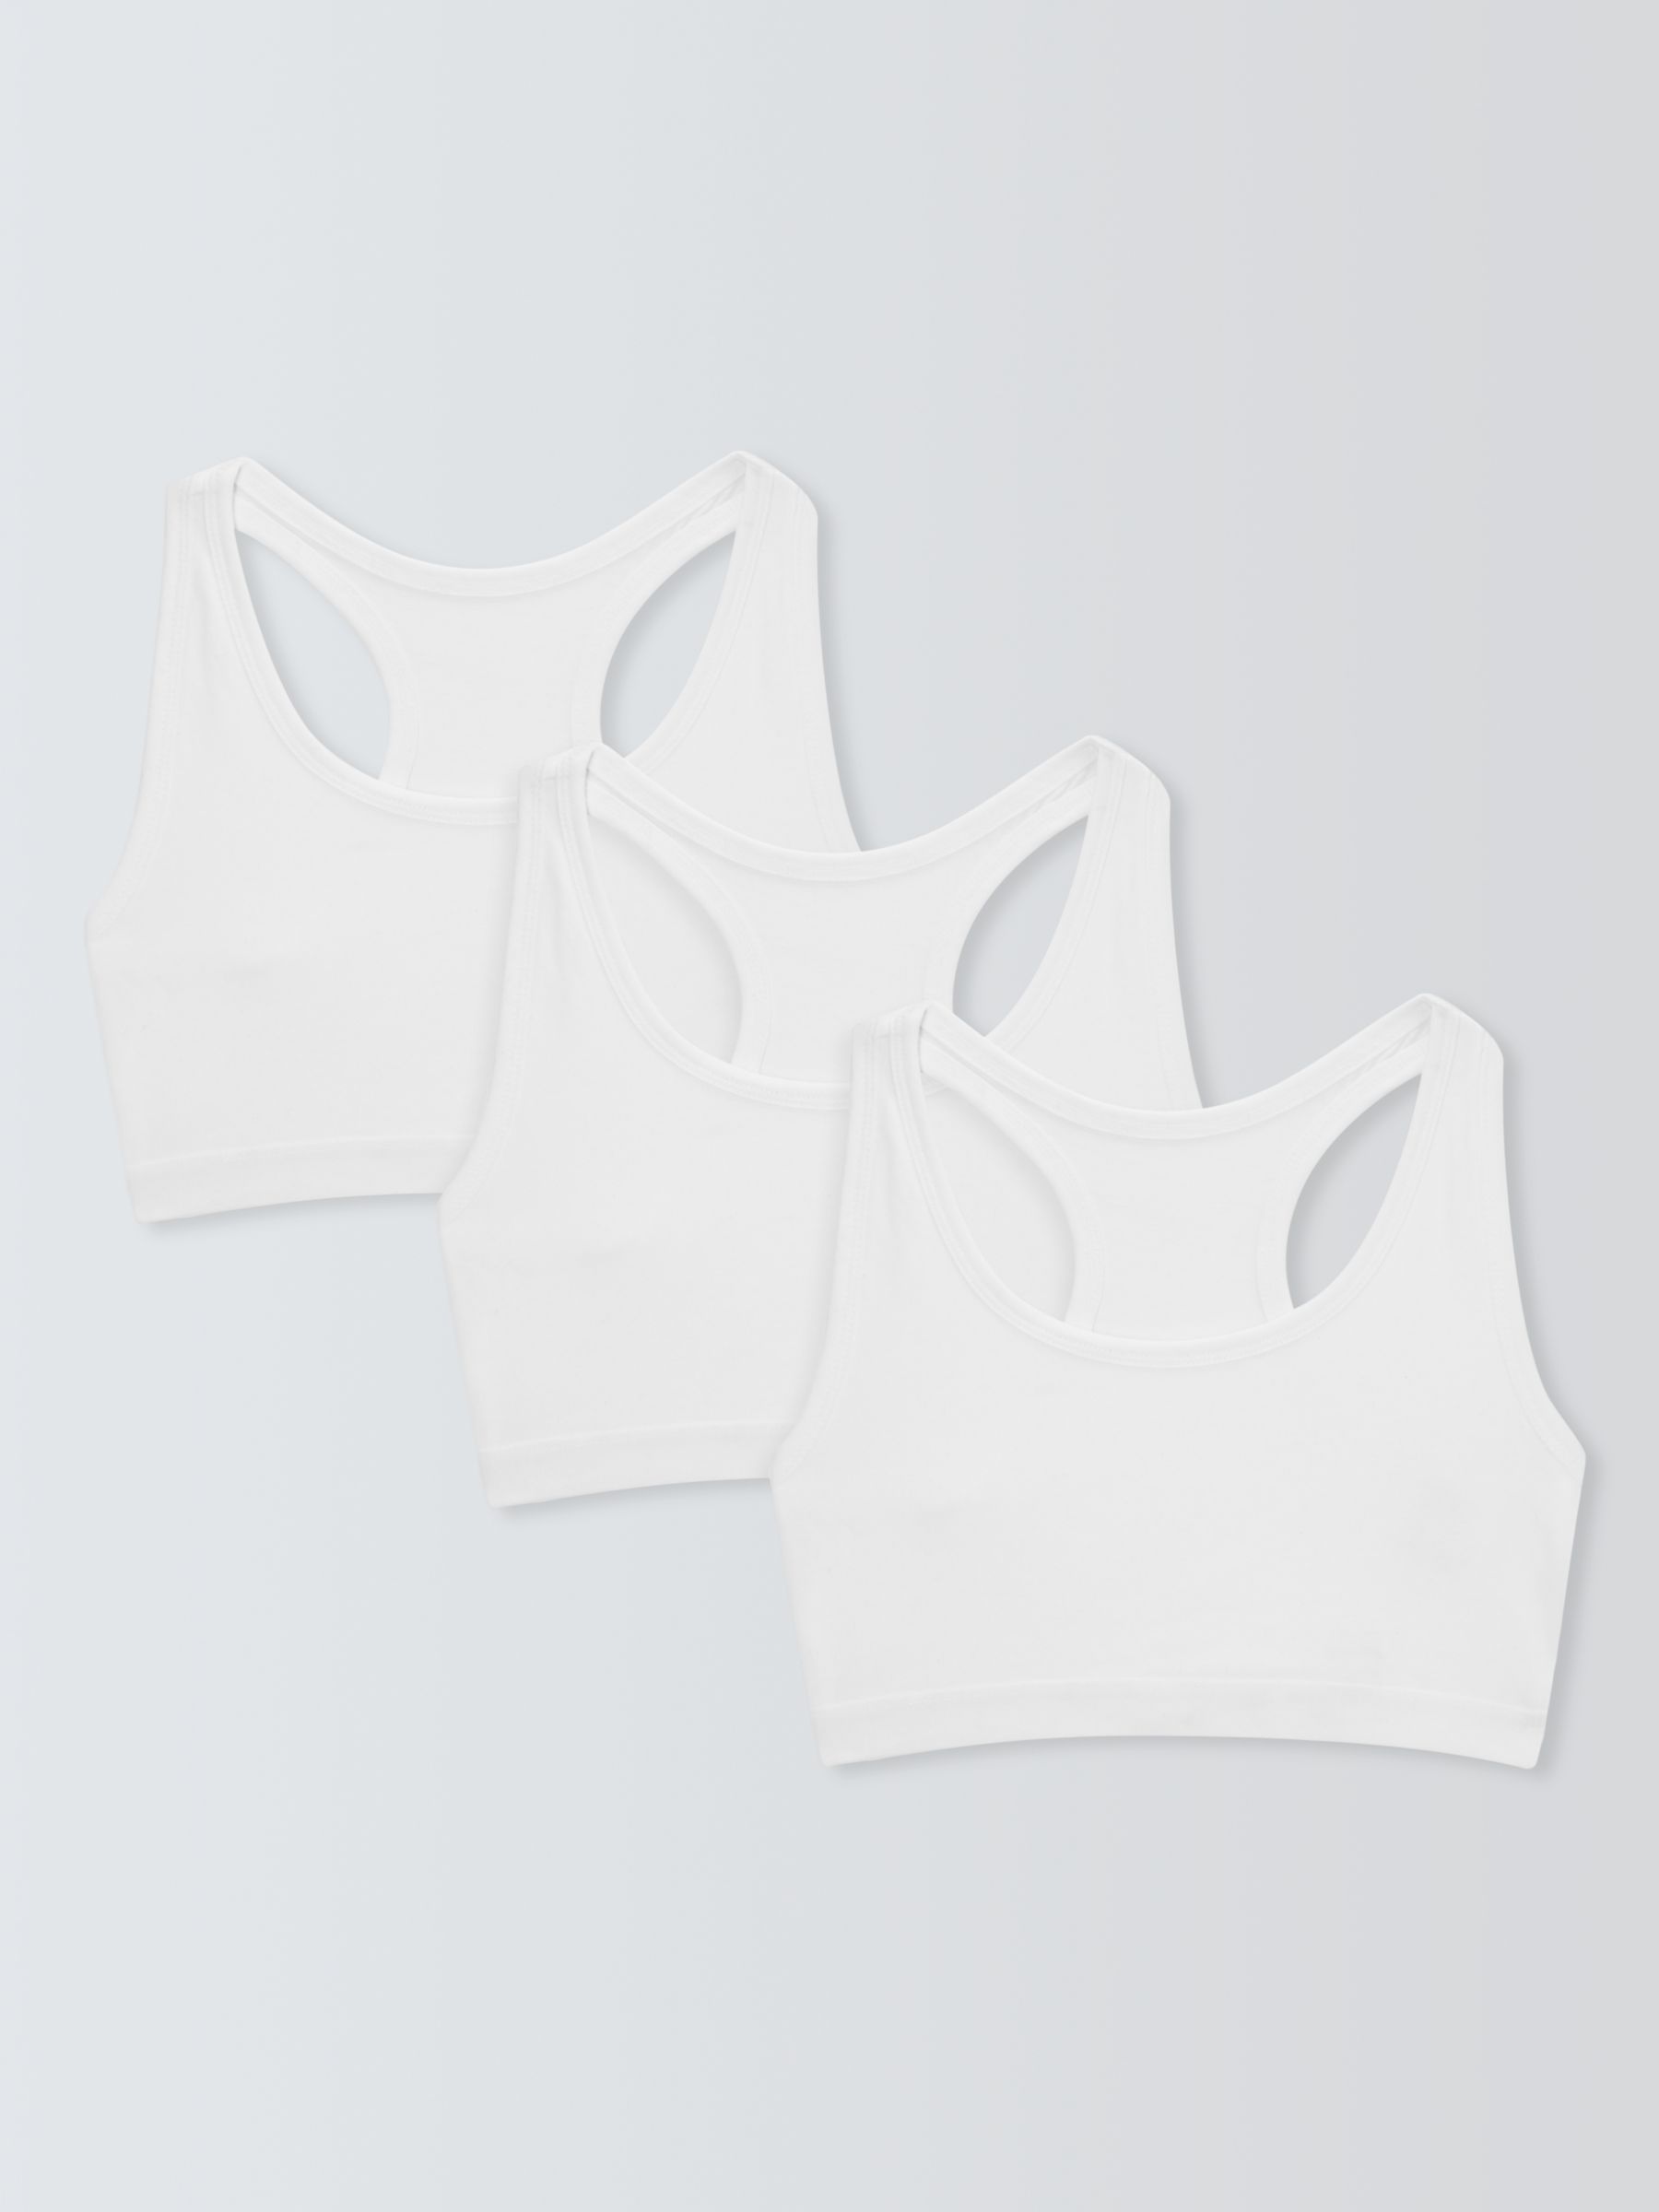 Buy John Lewis ANYDAY Girls' Sports Crop Tops, Pack of 3, White Online at johnlewis.com